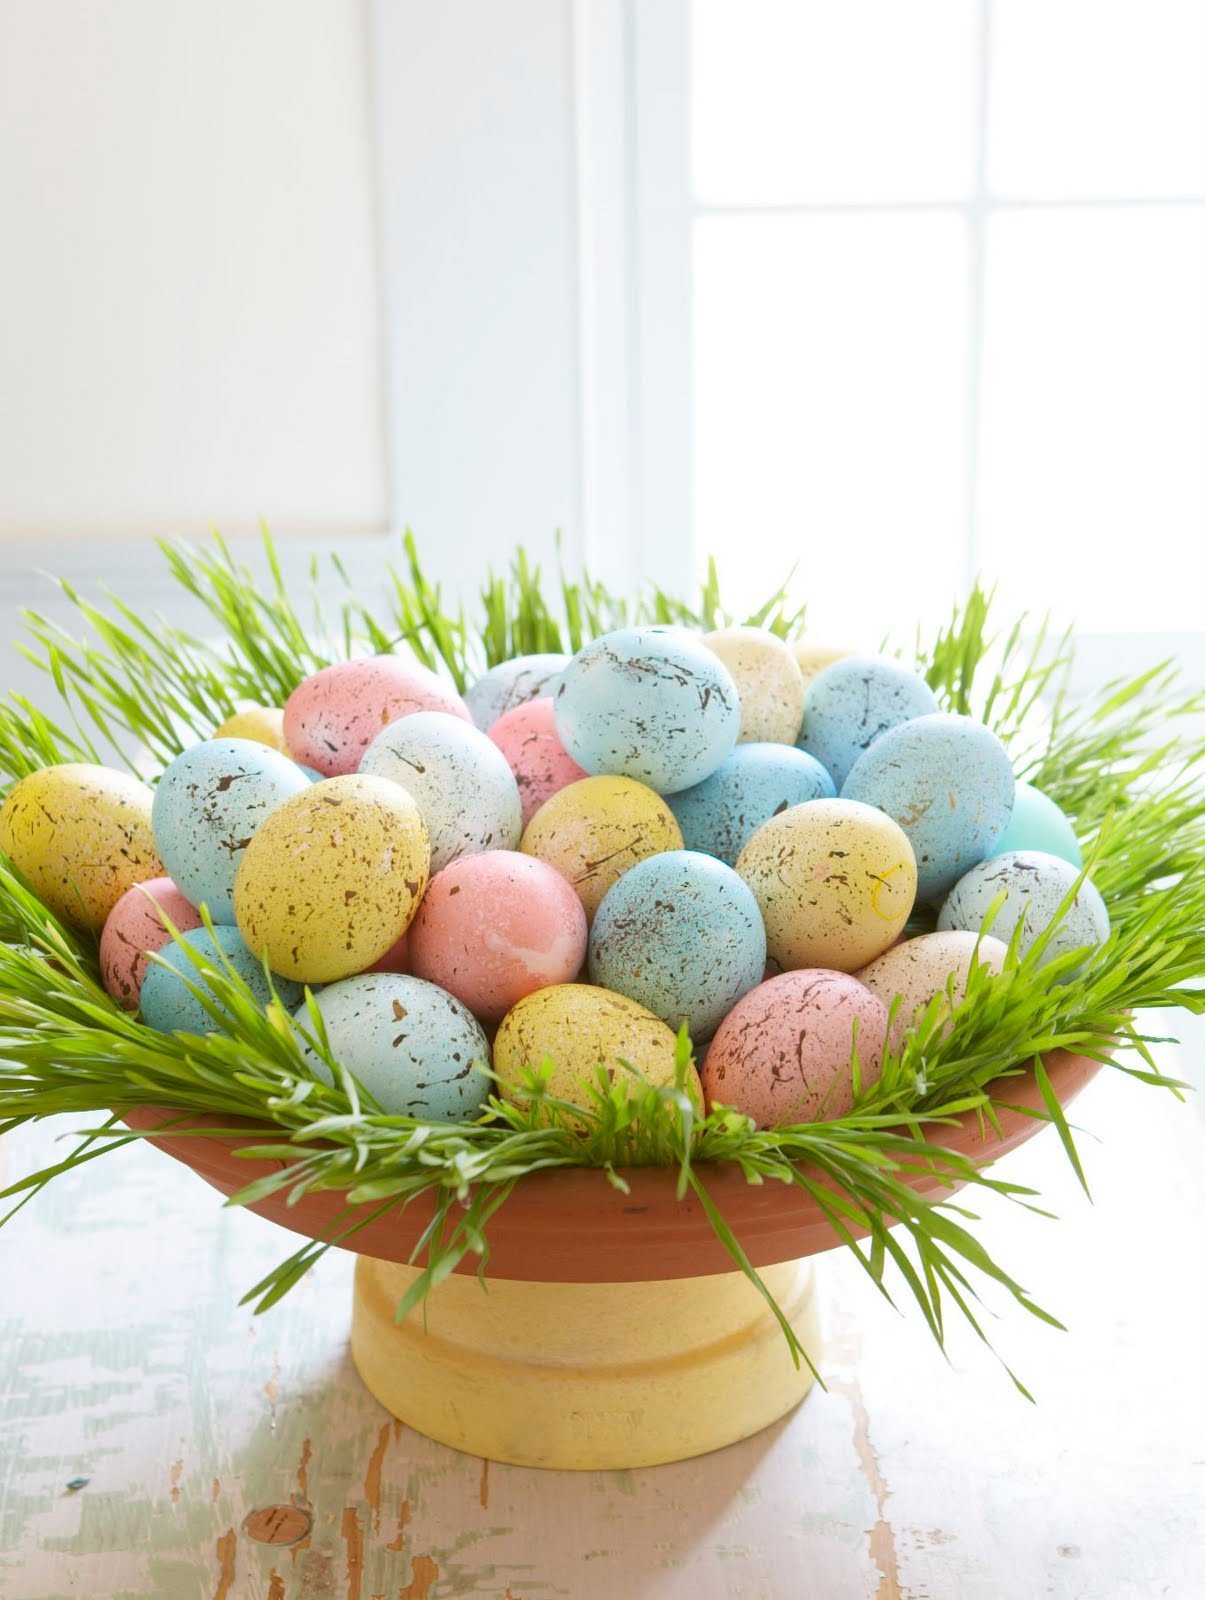 Coloring Easter Eggs With Food Coloring
 Karin Lidbeck Speckled Easter Eggs with Food Coloring